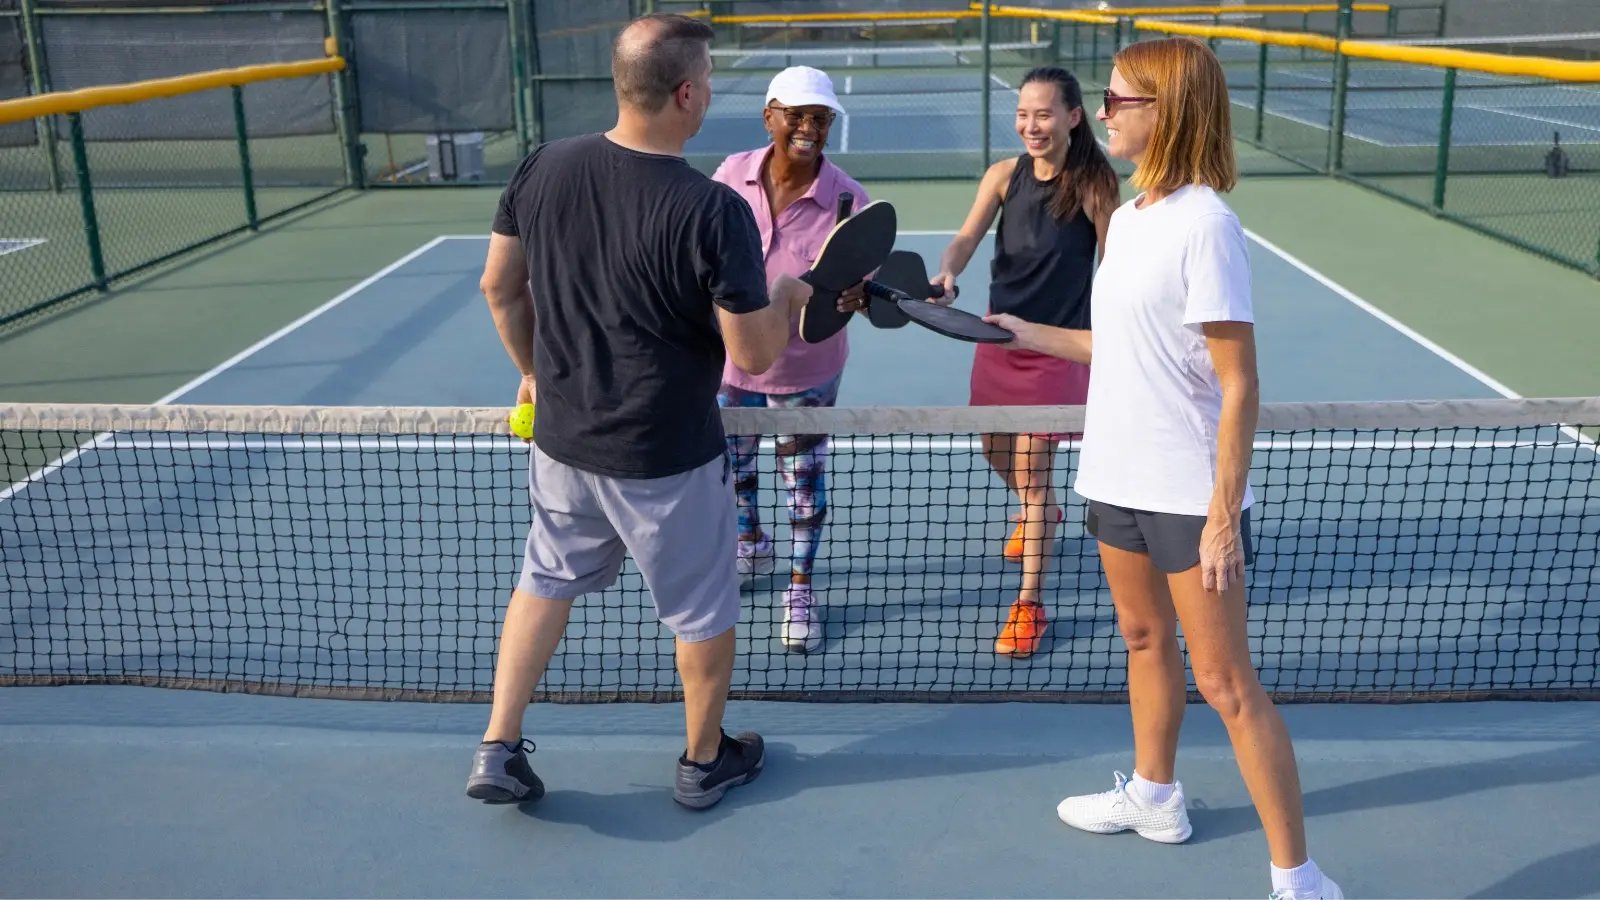 Benefits of pickleball for social connections and well-being